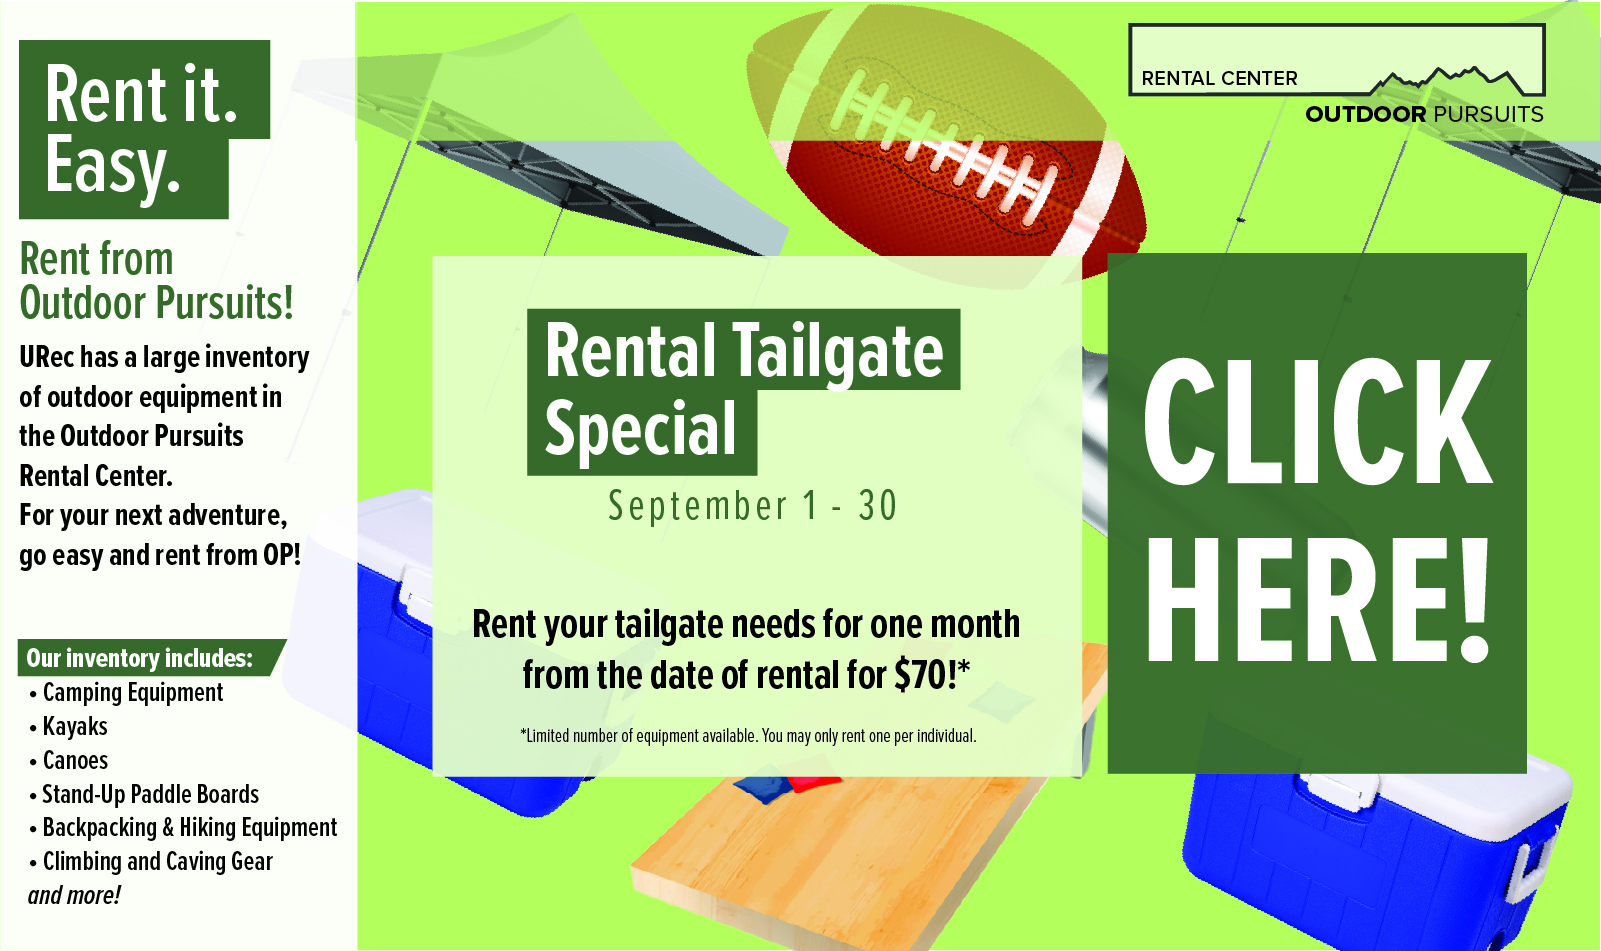 Rental Tailgate Special